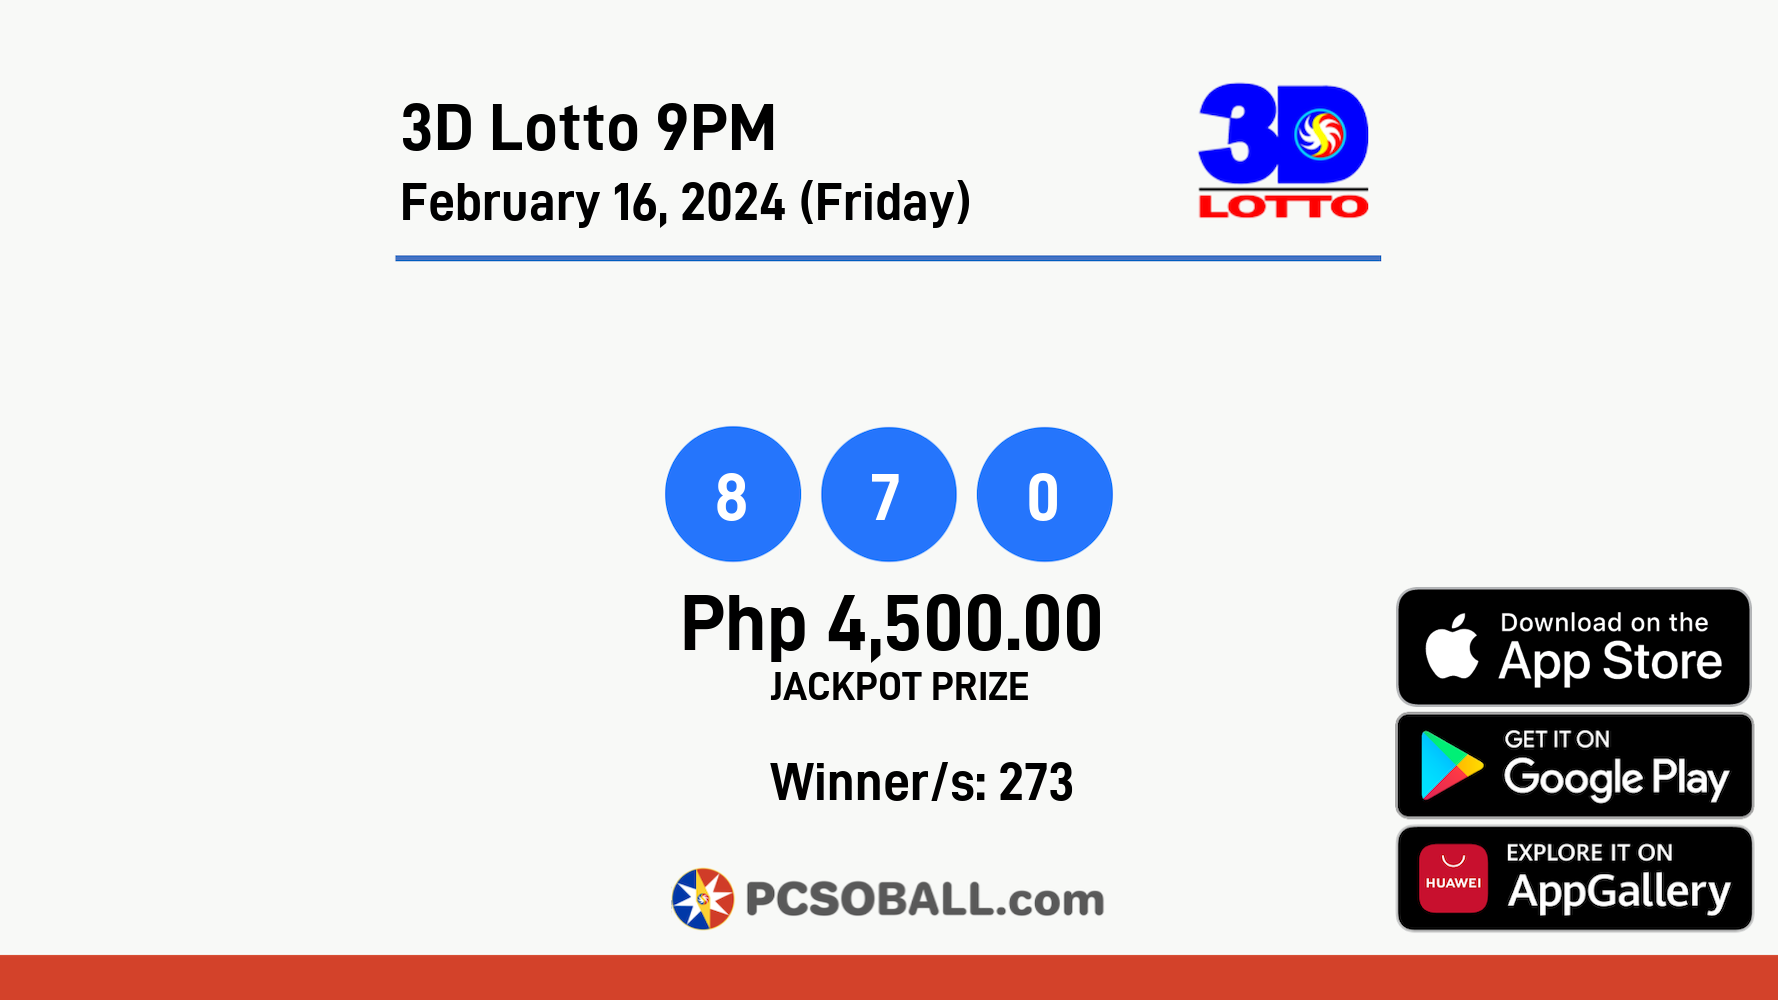 3D Lotto 9PM February 16, 2024 (Friday) Result